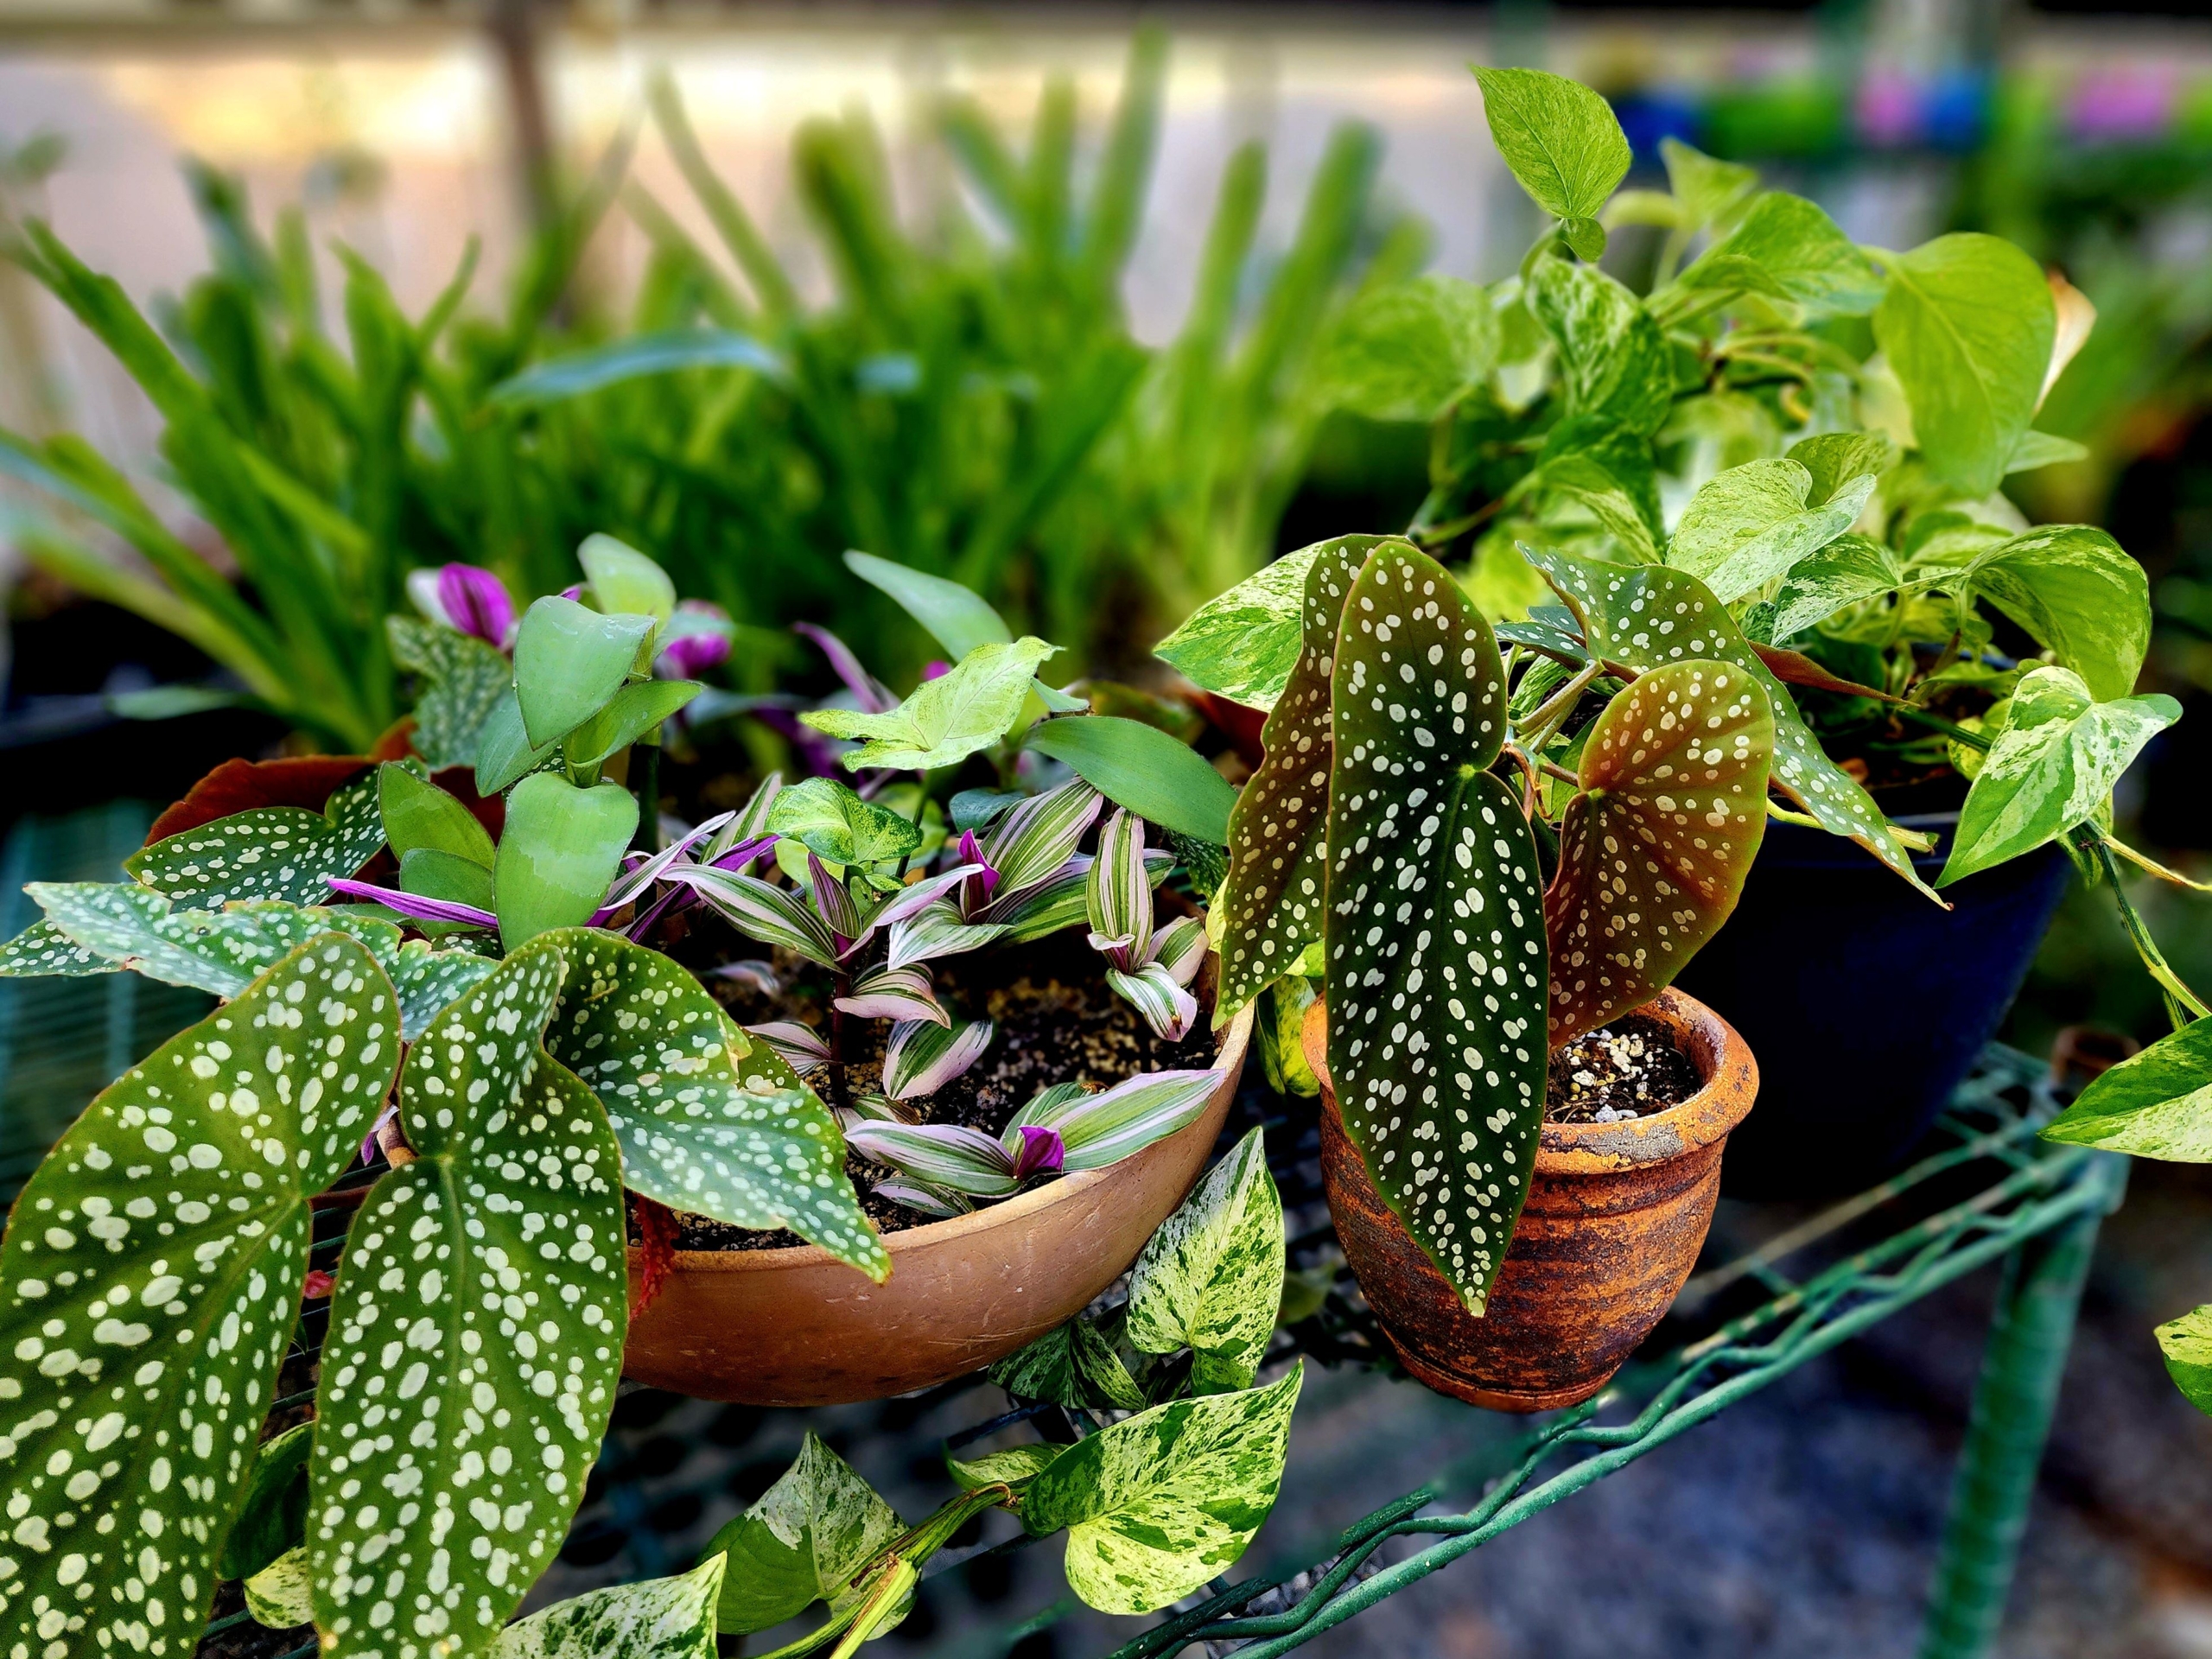 A table of leafy green potted plants